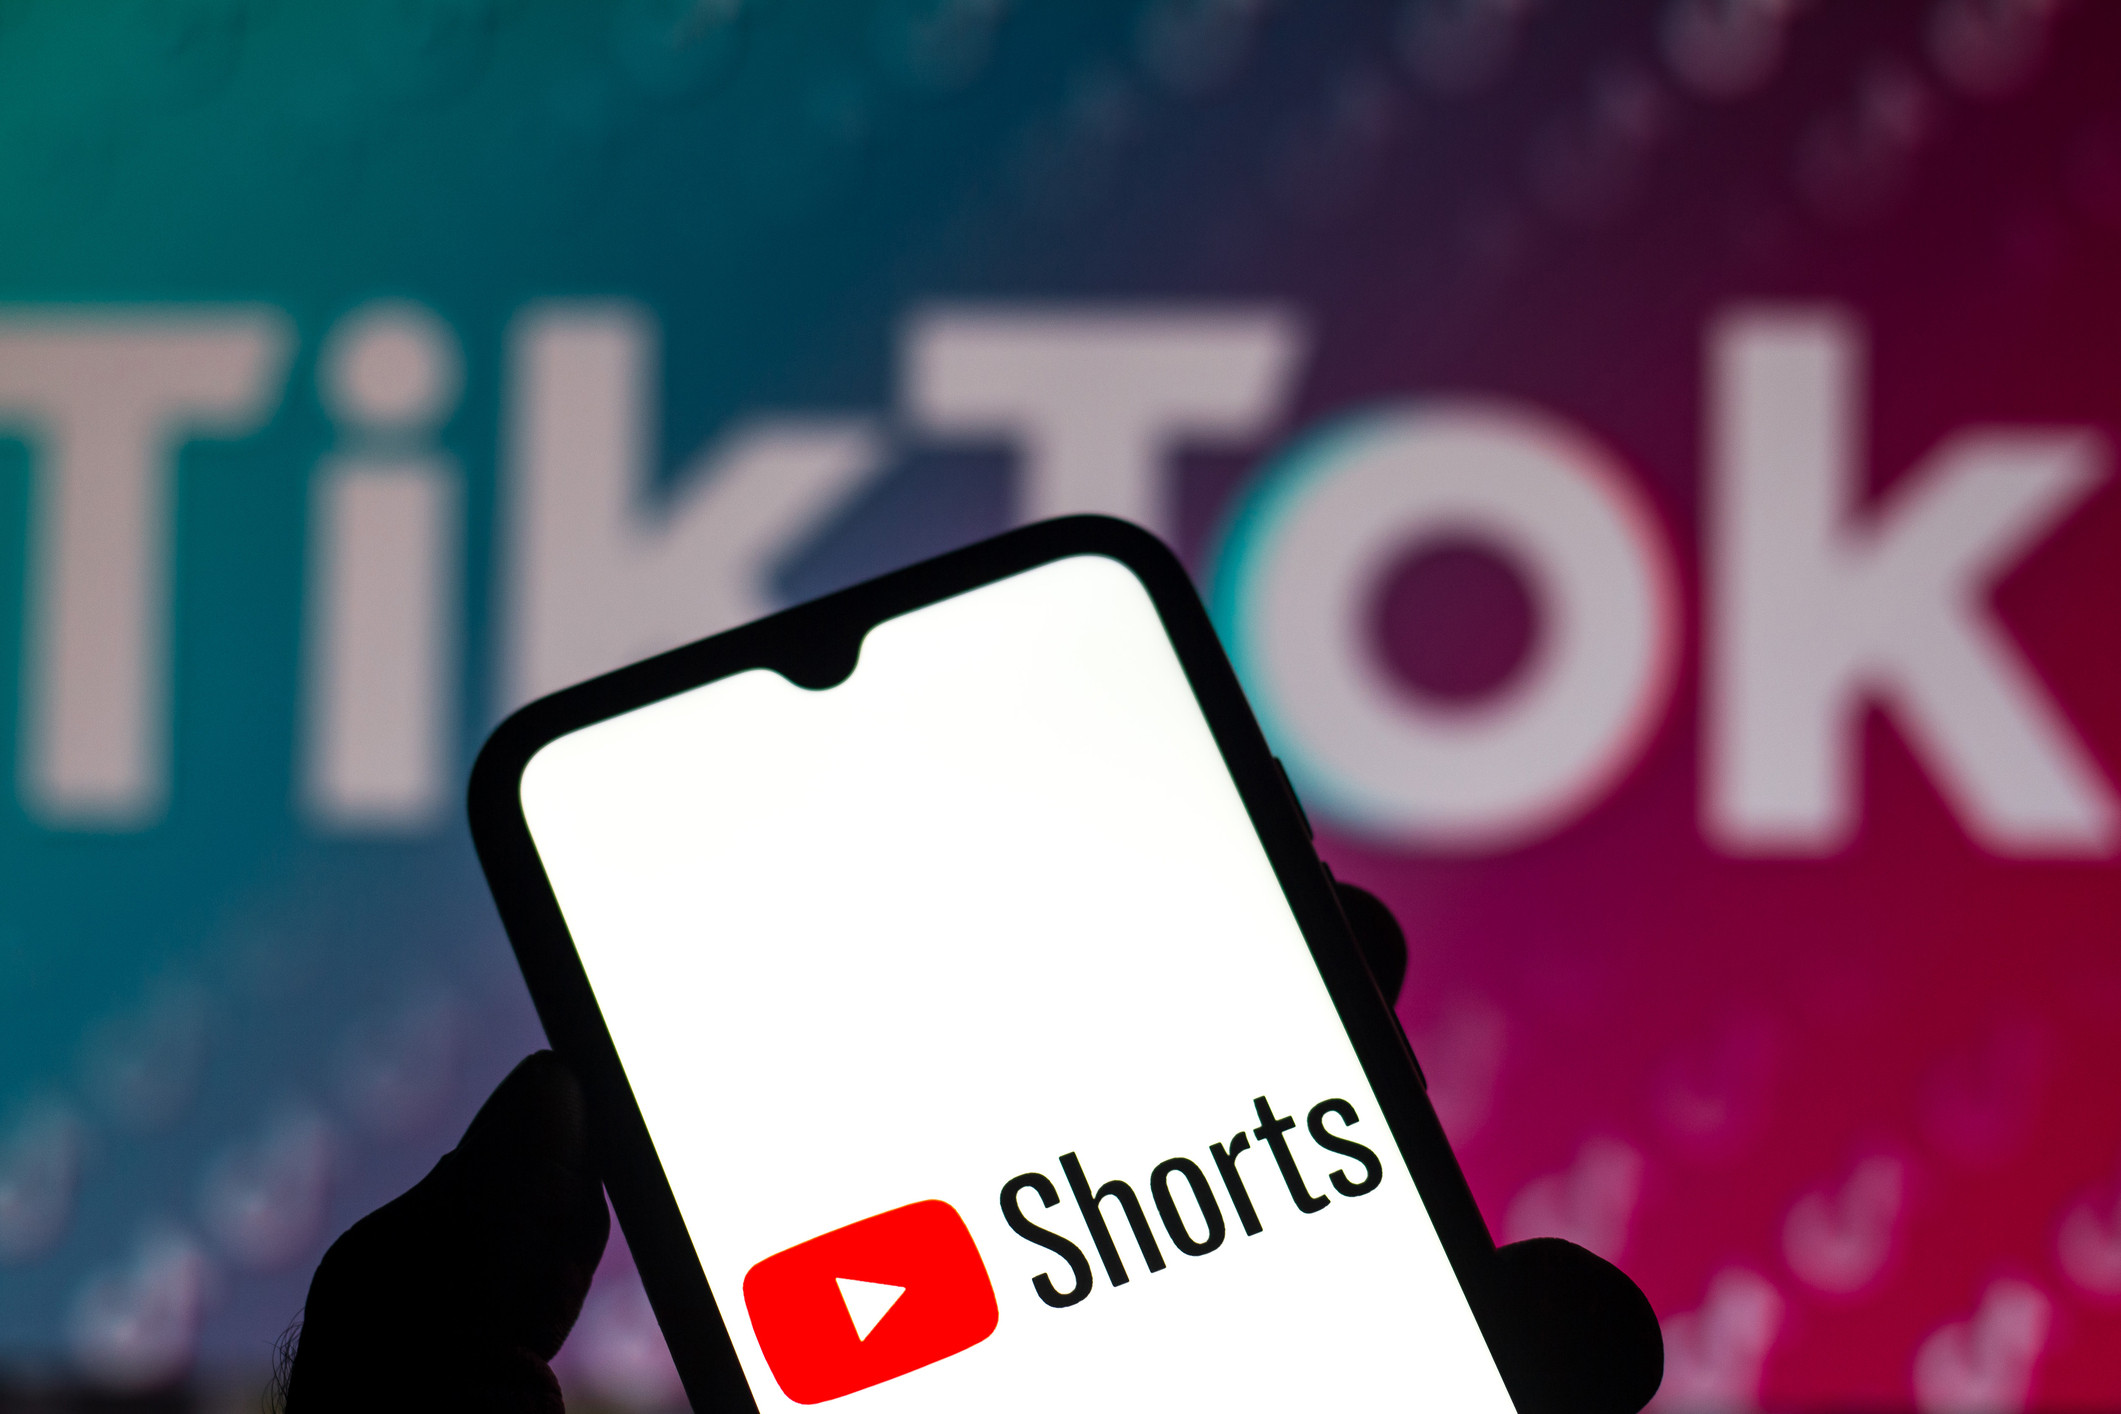 YouTube Shorts, which showcases videos that are less than a minute long, has been gaining ground as some creators see big benefit to subscriber counts. Photo: TNS